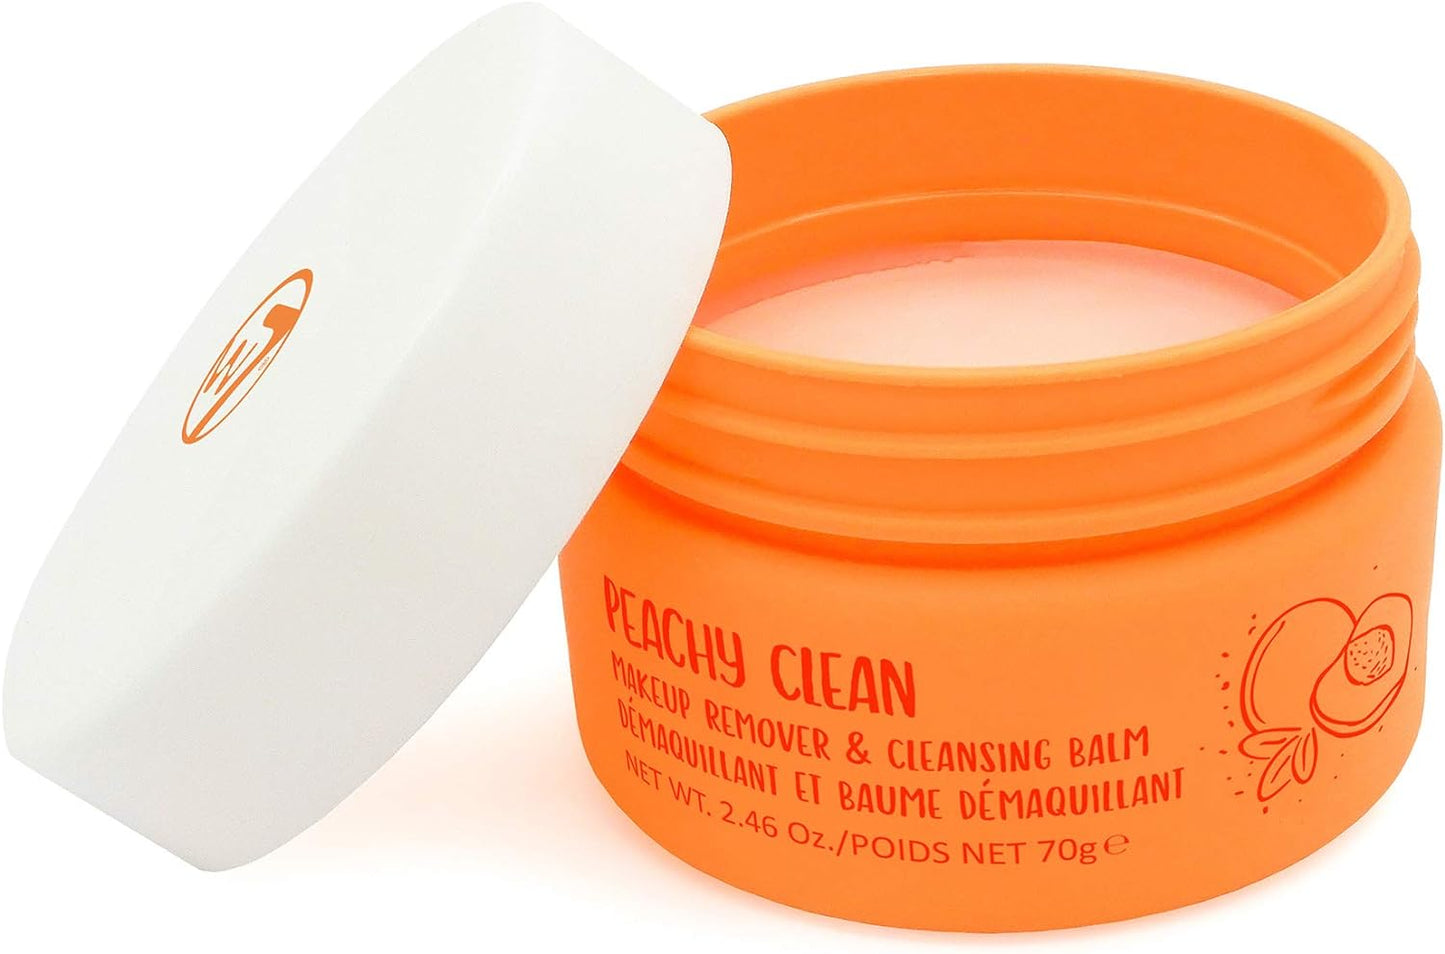 W7 Peachy Clean Makeup Remover and Cleansing Balm